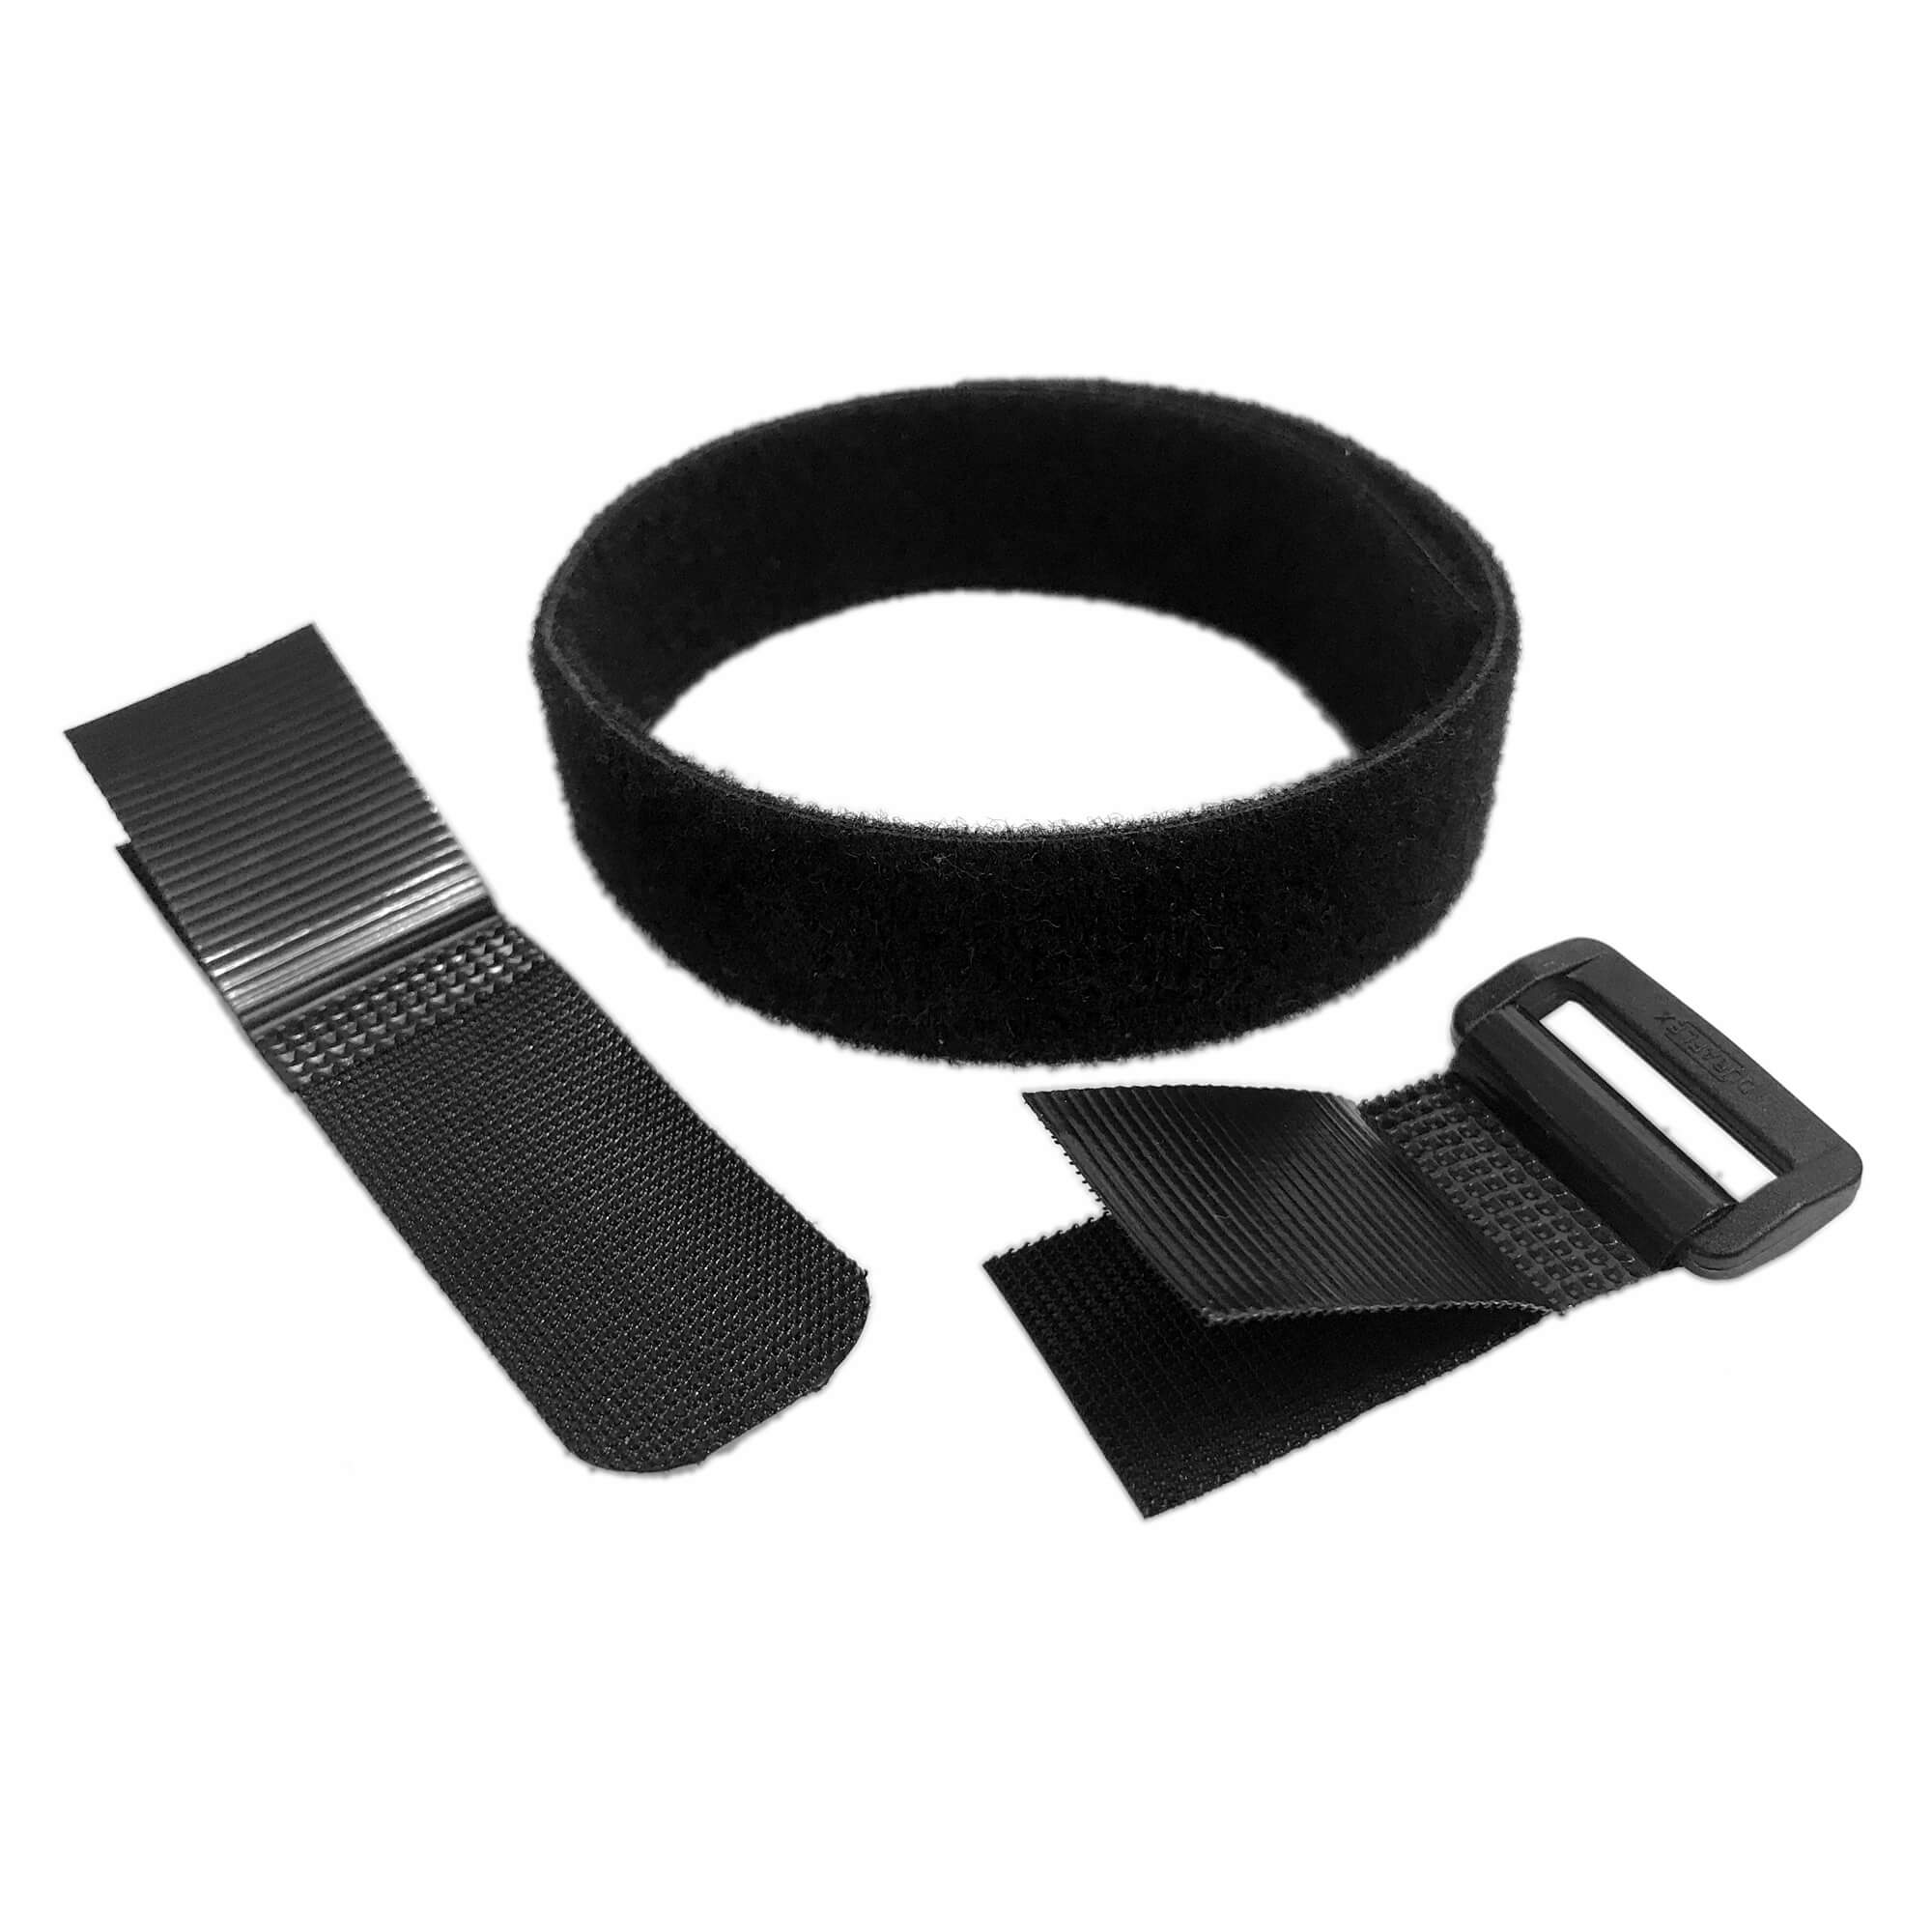 25mm Adjustable Buckle Strap Kit with Plastic Hook and Velour Loop